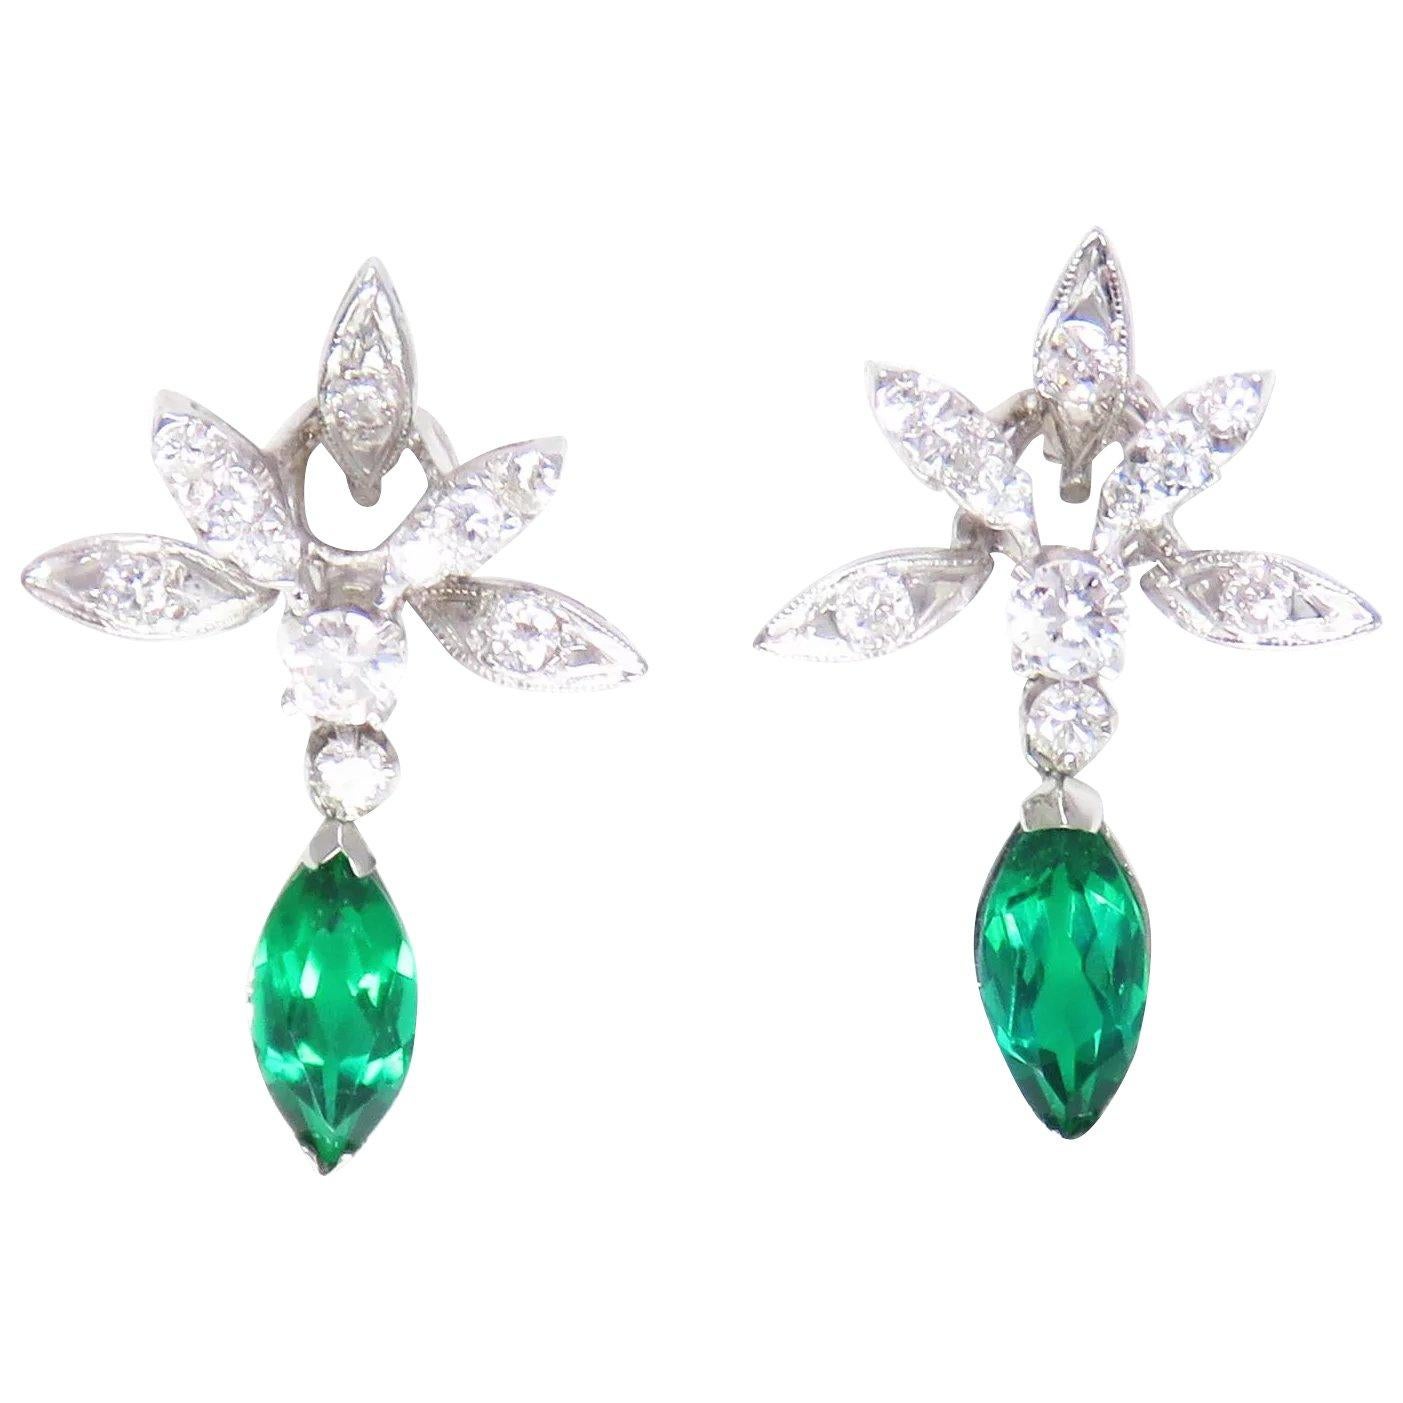 Striking Vintage 14k Gold 2.12 Carat Diamond Emerald Dangle Earrings

These beautiful festive earrings feature a beautiful 14k gold (white) floral framework, showcasing a total of 22 round brilliant cut white natural diamonds, totaling approximately